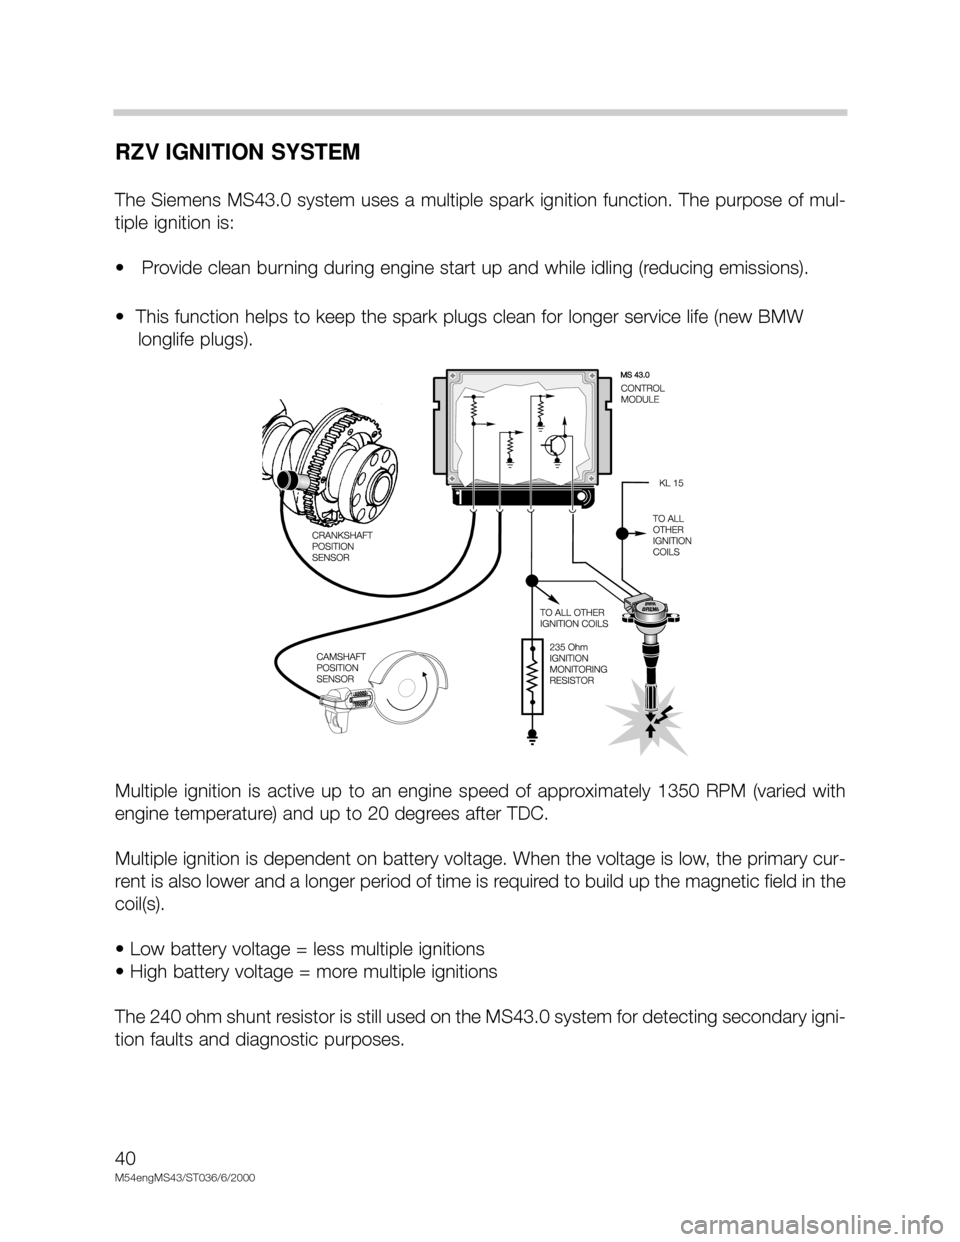 BMW X5 2001 E53 M54 Engine Owners Guide 40
M54engMS43/ST036/6/2000
RZV IGNITION SYSTEM
The Siemens MS43.0 system uses a multiple spark ignition function. The purpose of mul-
tiple ignition is:
•   Provide clean burning during engine start